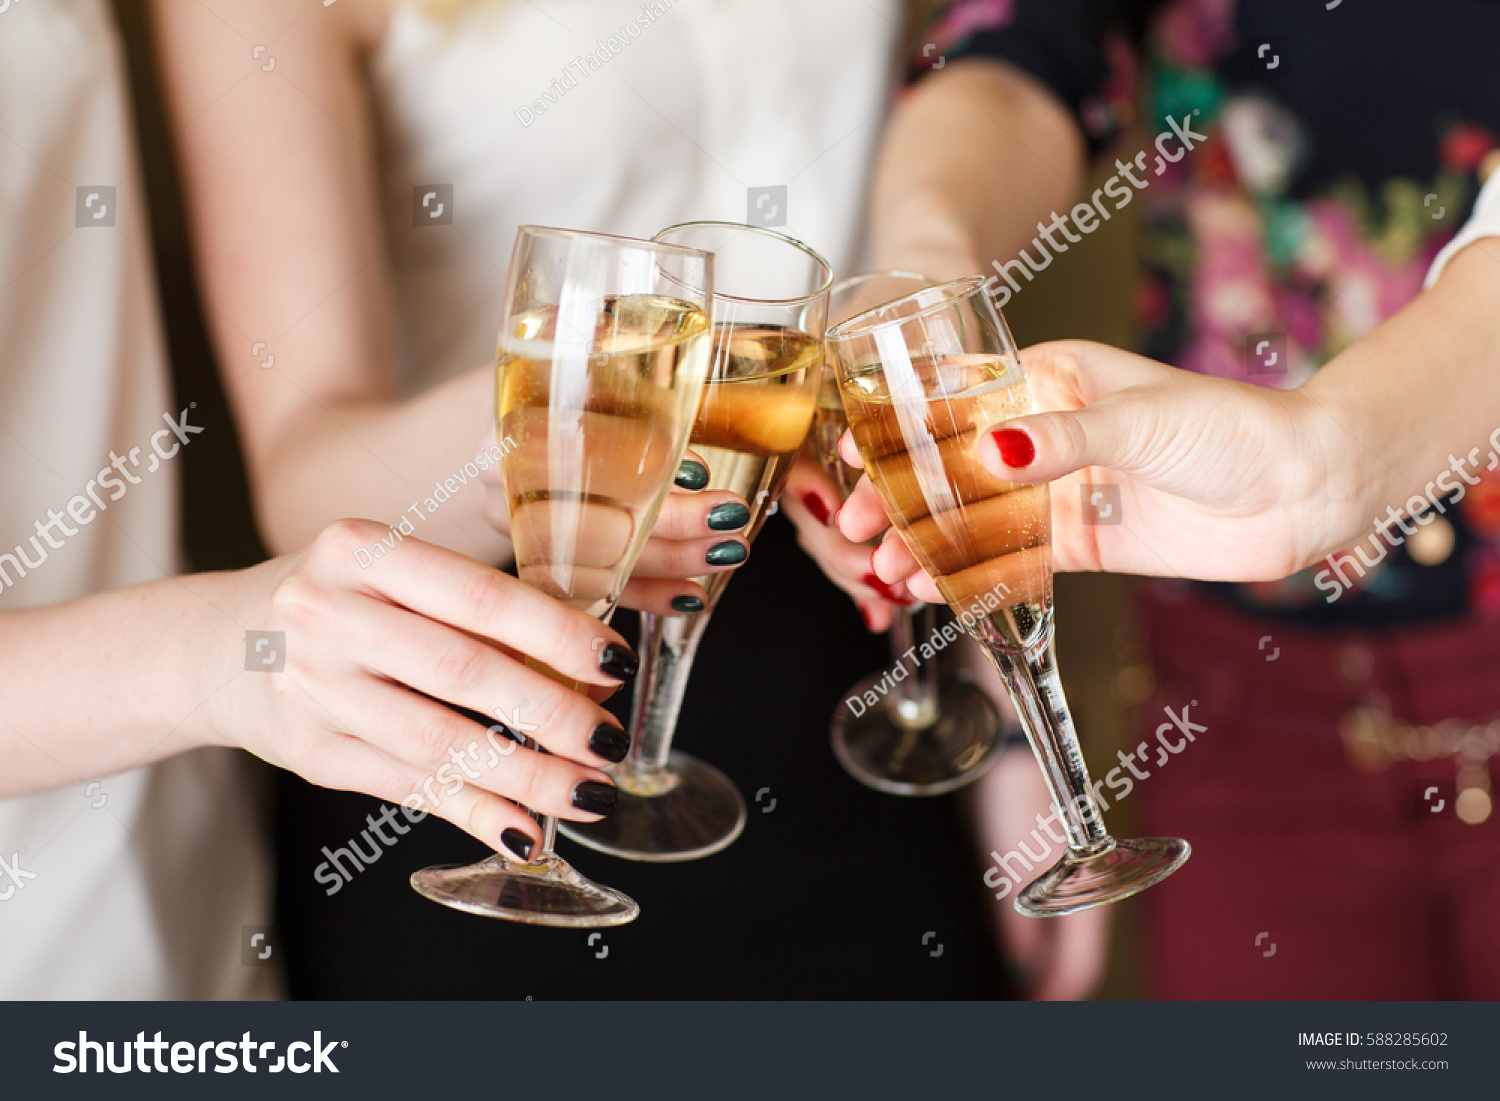 Hands holding the glasses of champagne making a toast #588285602